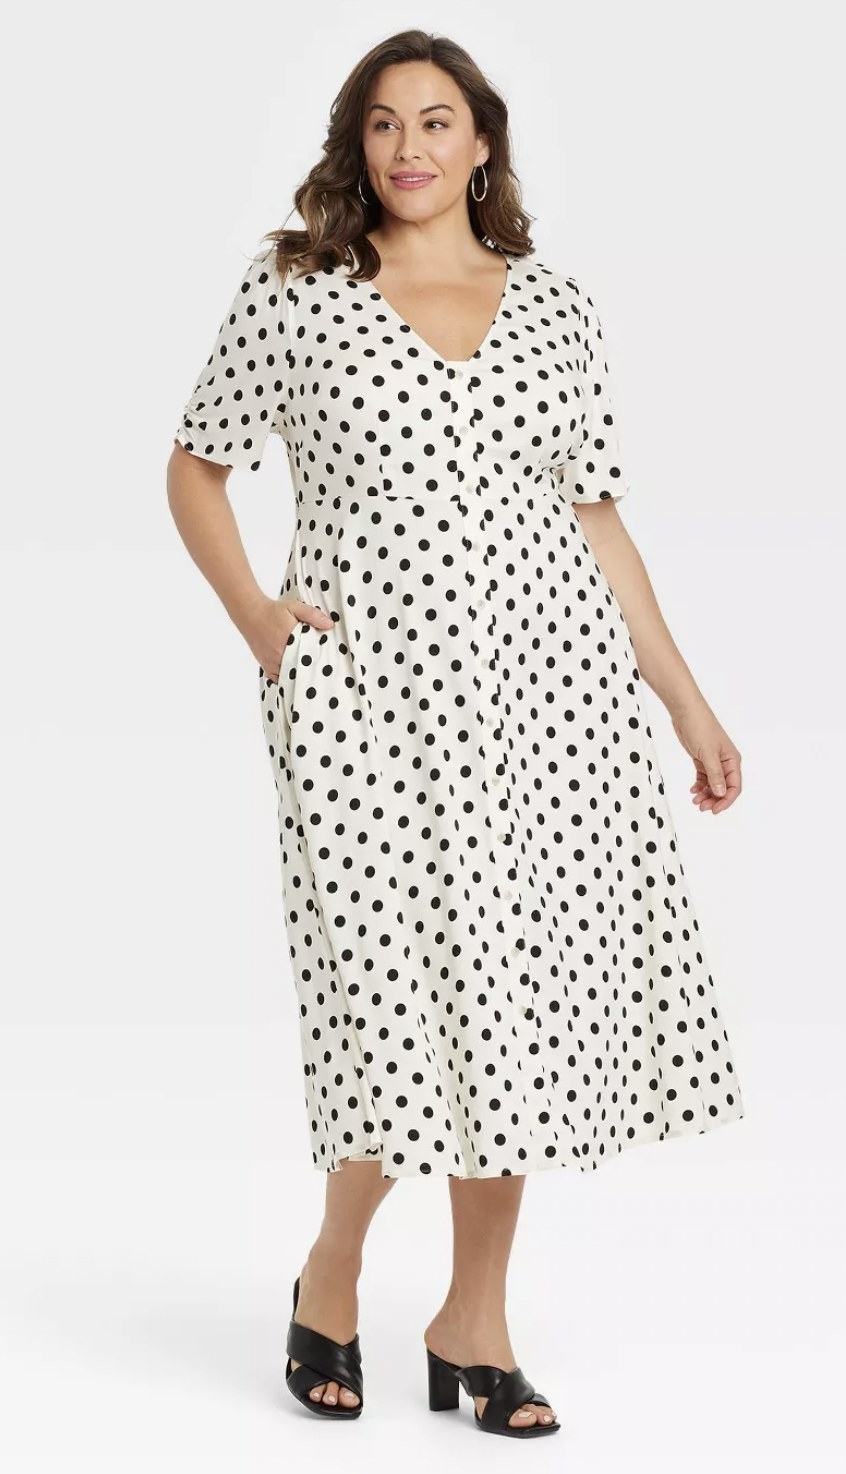 model wearing the dress in white with black polka dots